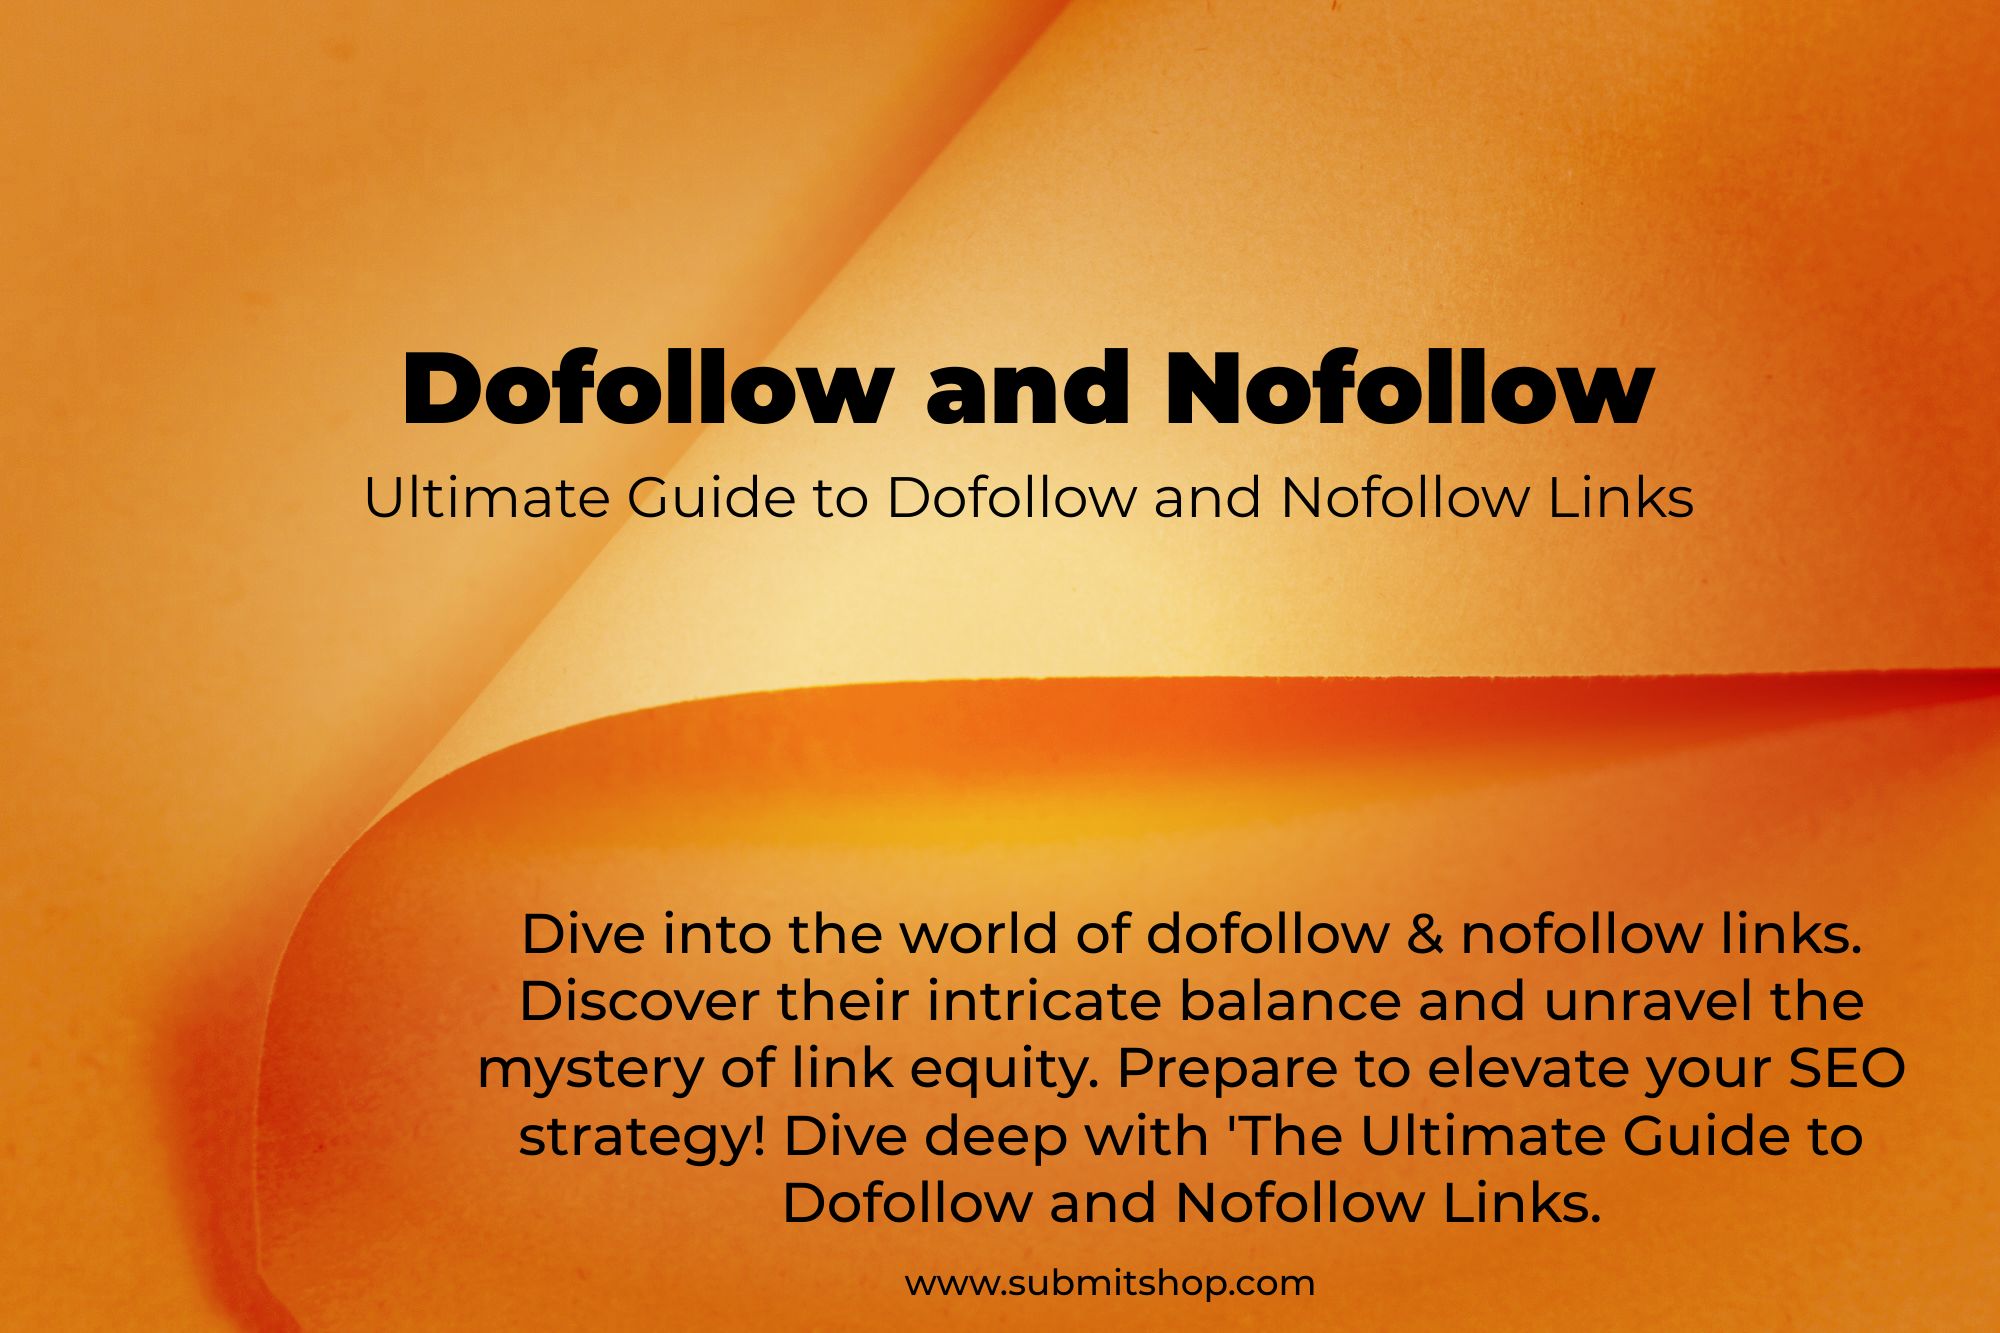 Dofollow And Nofollow Links In Your SEO Strategy